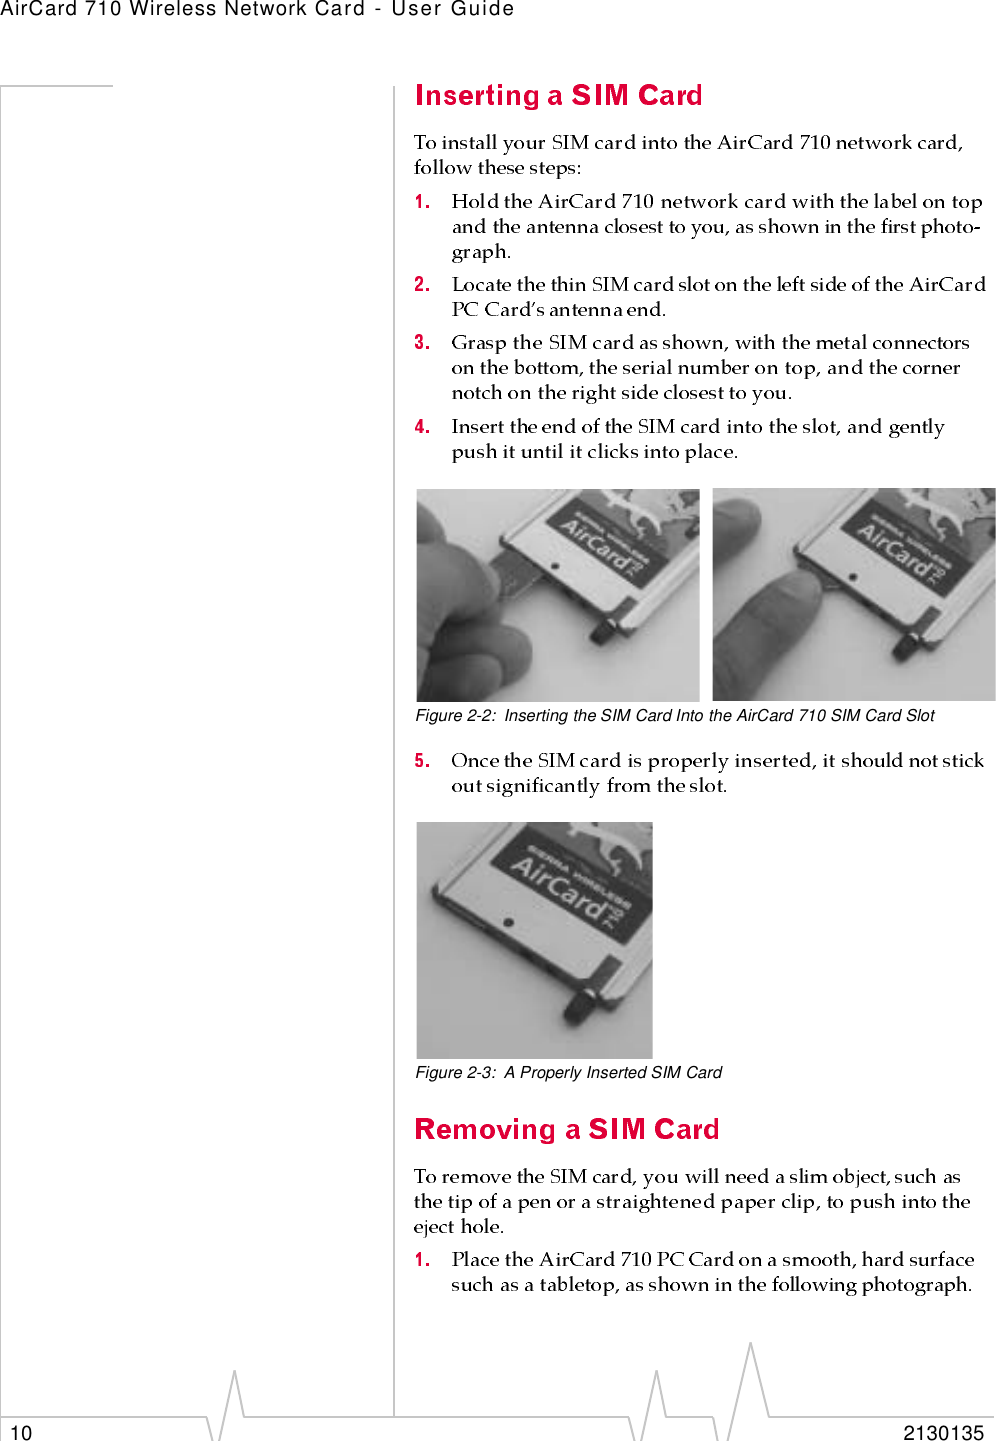 AirCard 710 Wireless Network Card - User Guide10 2130135Figure 2-2: Inserting the SIM Card Into the AirCard 710 SIM Card SlotFigure 2-3: A Properly Inserted SIM Card